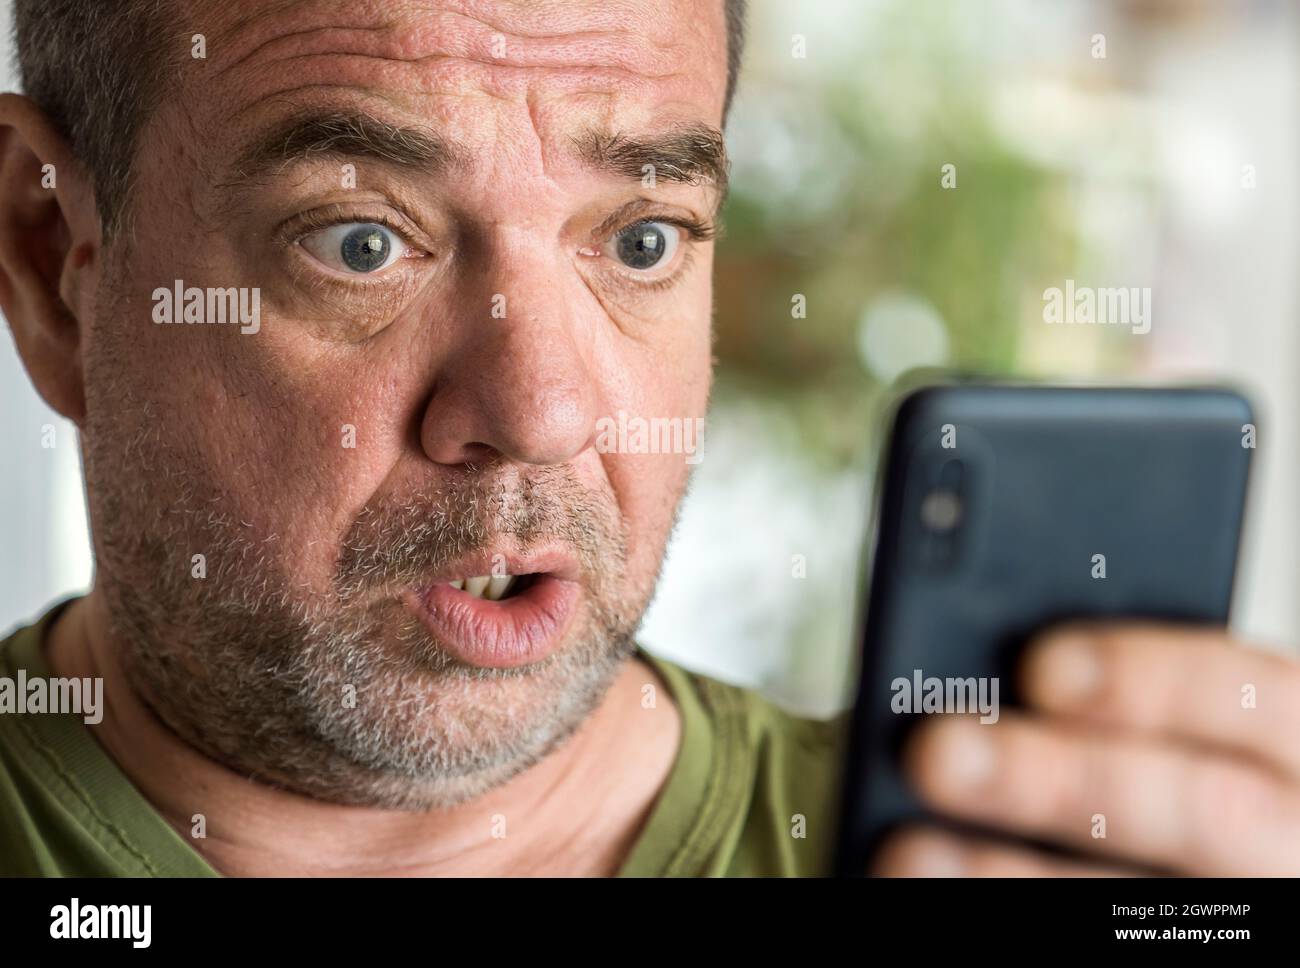 Surprised Man With A Smartphone. Bad News Concept Stock Photo